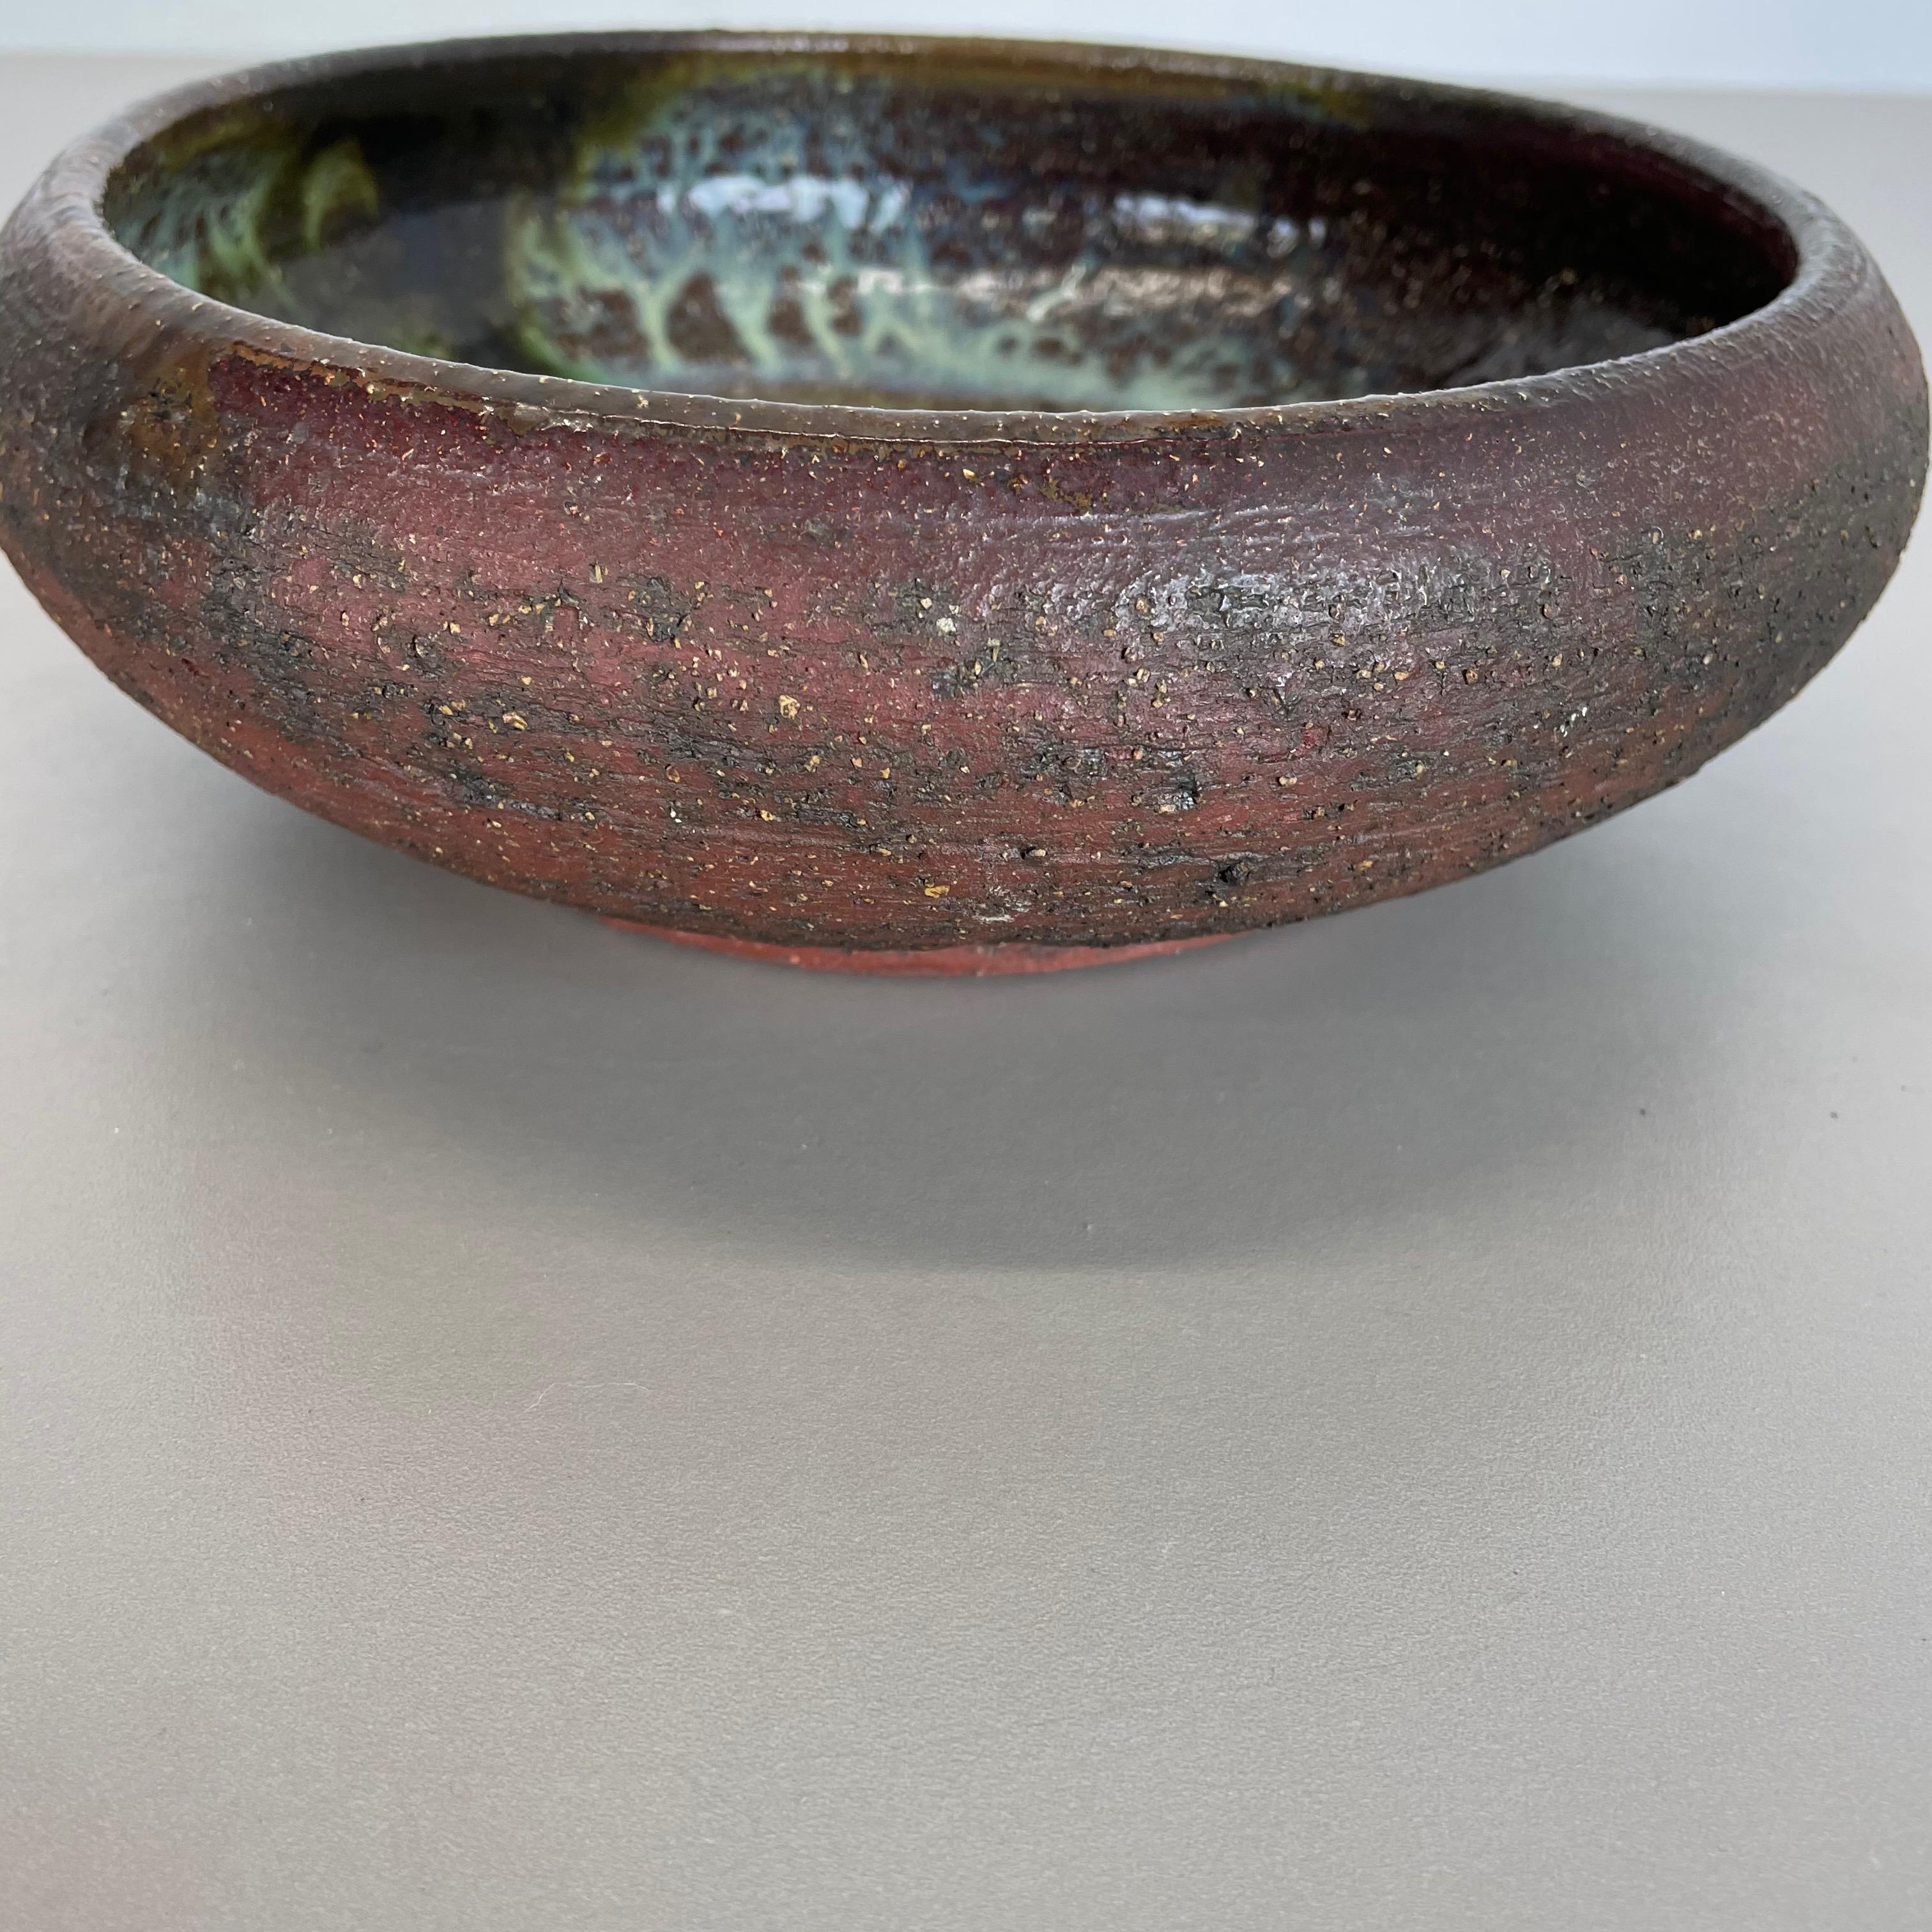 Ceramic Studio Pottery Bowl Shell Element by Gerhard Liebenthron, Germany, 1970s For Sale 7